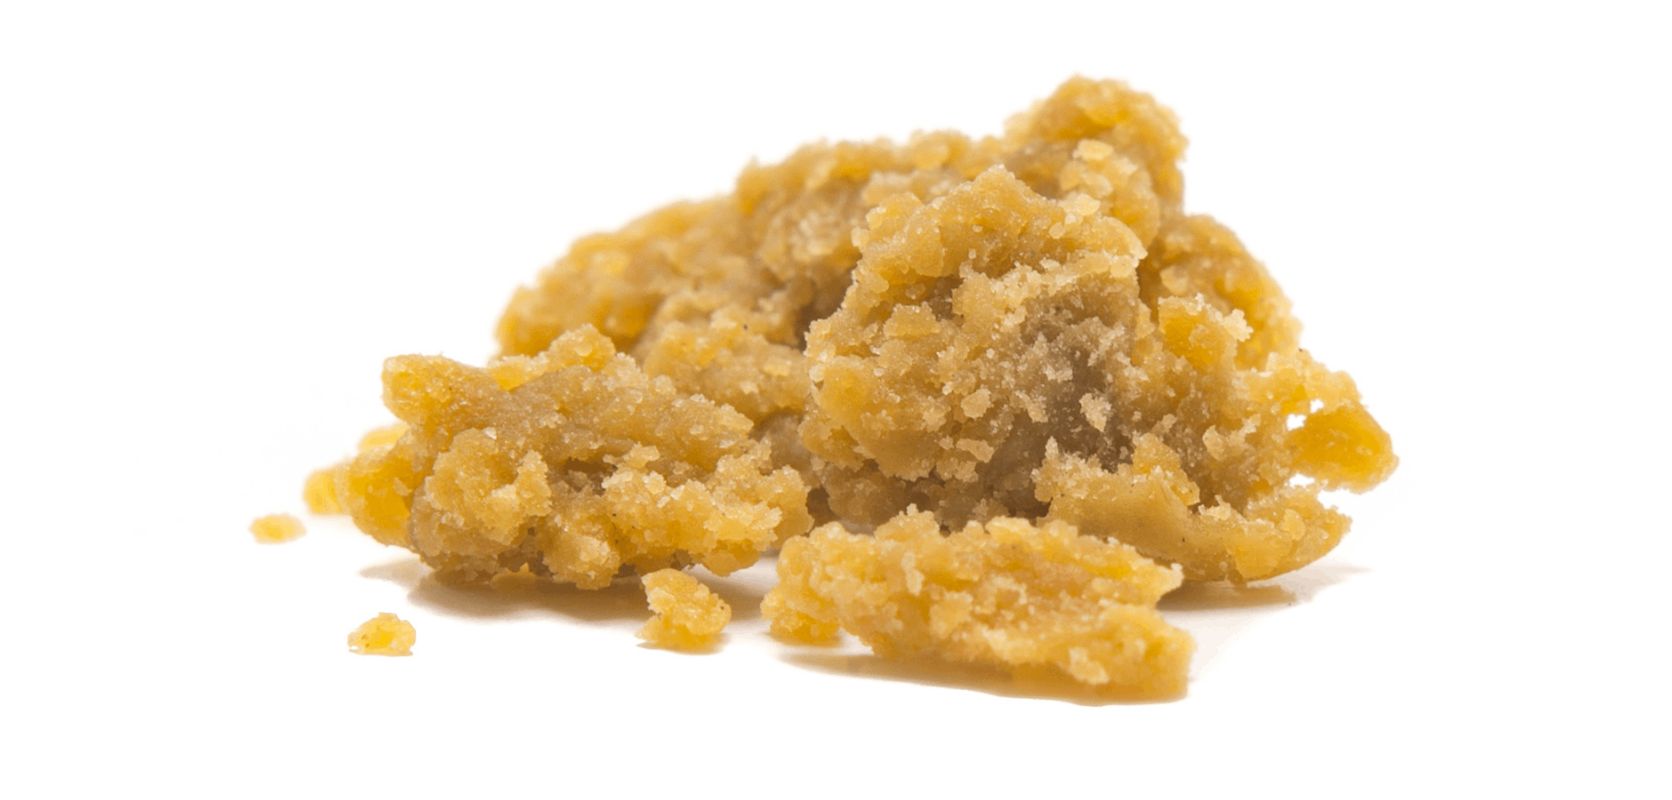 crumble THC is a type of cannabis concentrate that is known for its unique texture and high potency. 